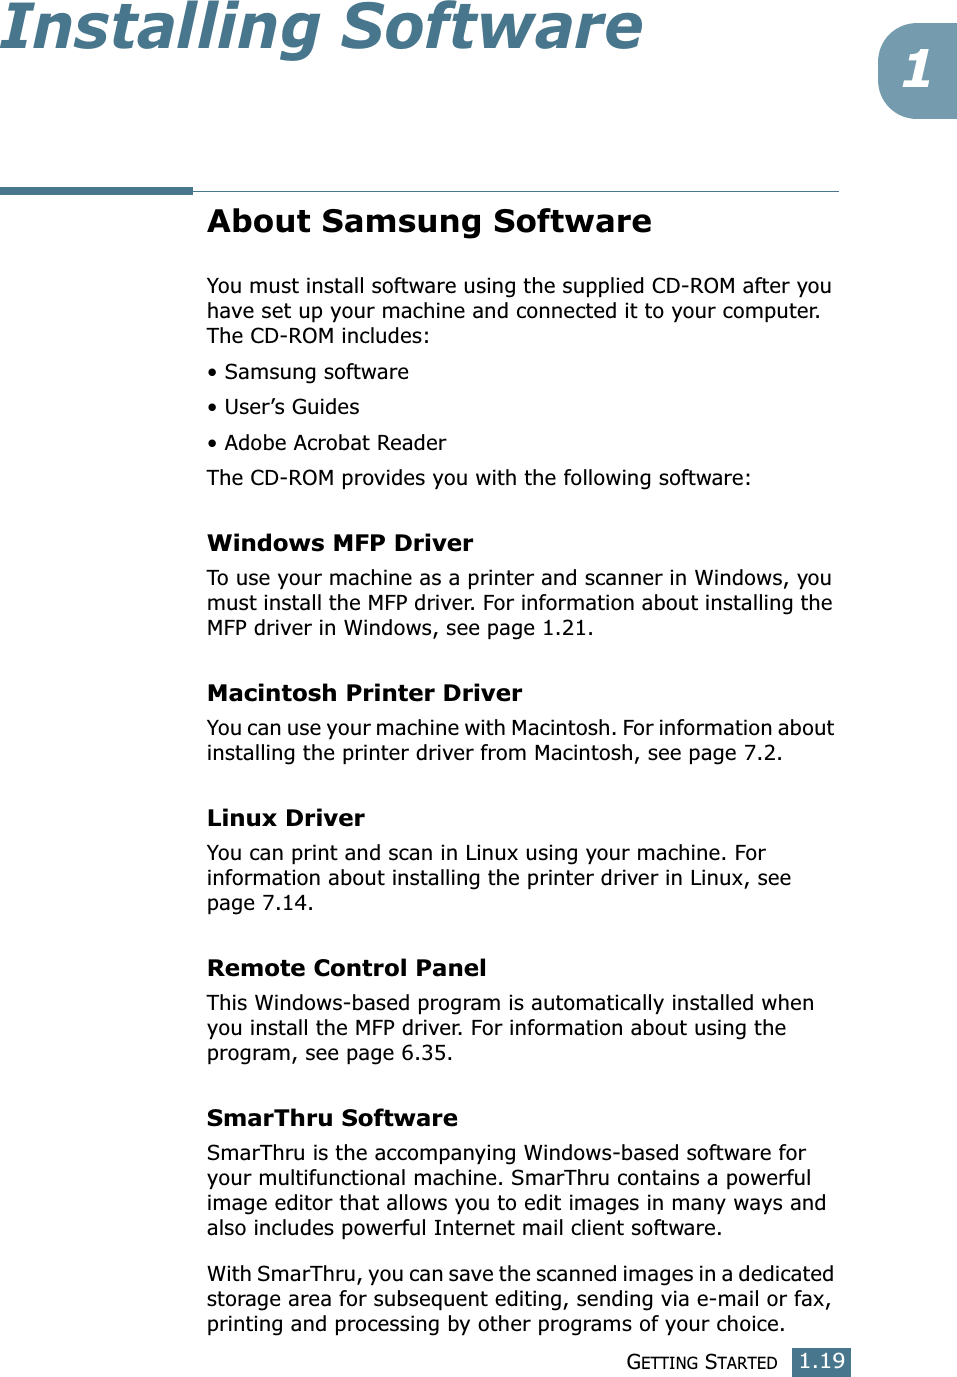 GETTING STARTED1.191Installing SoftwareAbout Samsung SoftwareYou must install software using the supplied CD-ROM after you have set up your machine and connected it to your computer. The CD-ROM includes:• Samsung software• User’s Guides• Adobe Acrobat ReaderThe CD-ROM provides you with the following software:Windows MFP Driver To use your machine as a printer and scanner in Windows, you must install the MFP driver. For information about installing the MFP driver in Windows, see page 1.21.Macintosh Printer DriverYou can use your machine with Macintosh. For information about installing the printer driver from Macintosh, see page 7.2.Linux DriverYou can print and scan in Linux using your machine. For information about installing the printer driver in Linux, see page 7.14. Remote Control PanelThis Windows-based program is automatically installed when you install the MFP driver. For information about using the program, see page 6.35.SmarThru SoftwareSmarThru is the accompanying Windows-based software for your multifunctional machine. SmarThru contains a powerful image editor that allows you to edit images in many ways and also includes powerful Internet mail client software. With SmarThru, you can save the scanned images in a dedicated storage area for subsequent editing, sending via e-mail or fax, printing and processing by other programs of your choice.